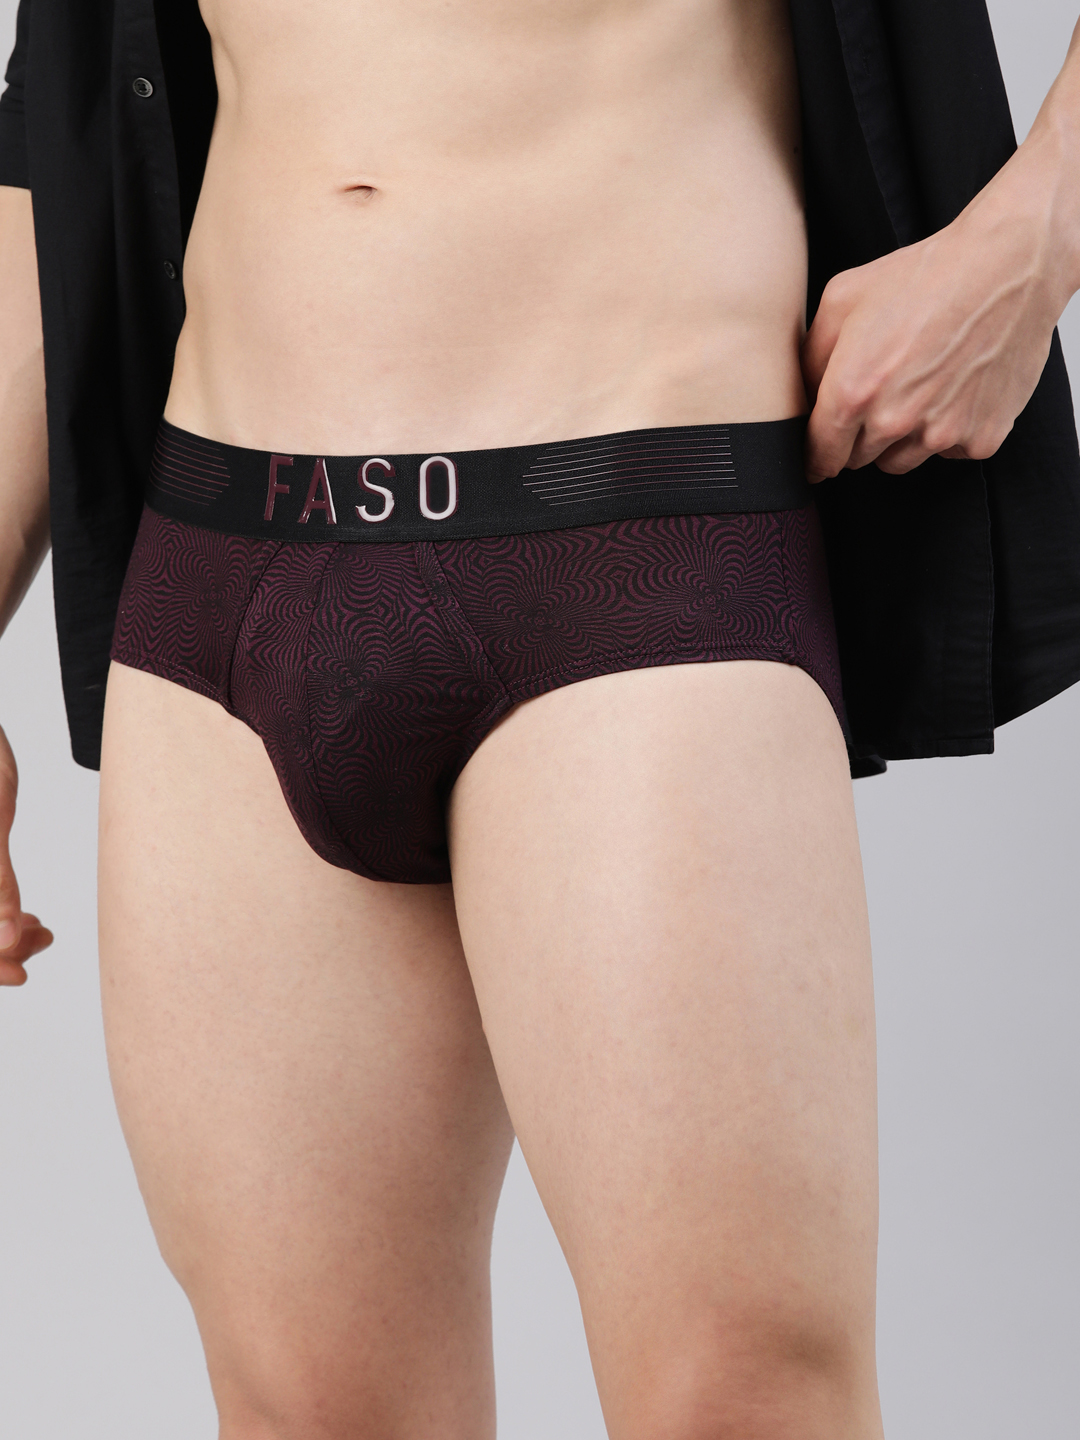 FASO Embossed Outer Elastic Cotton Brief - FS 2004